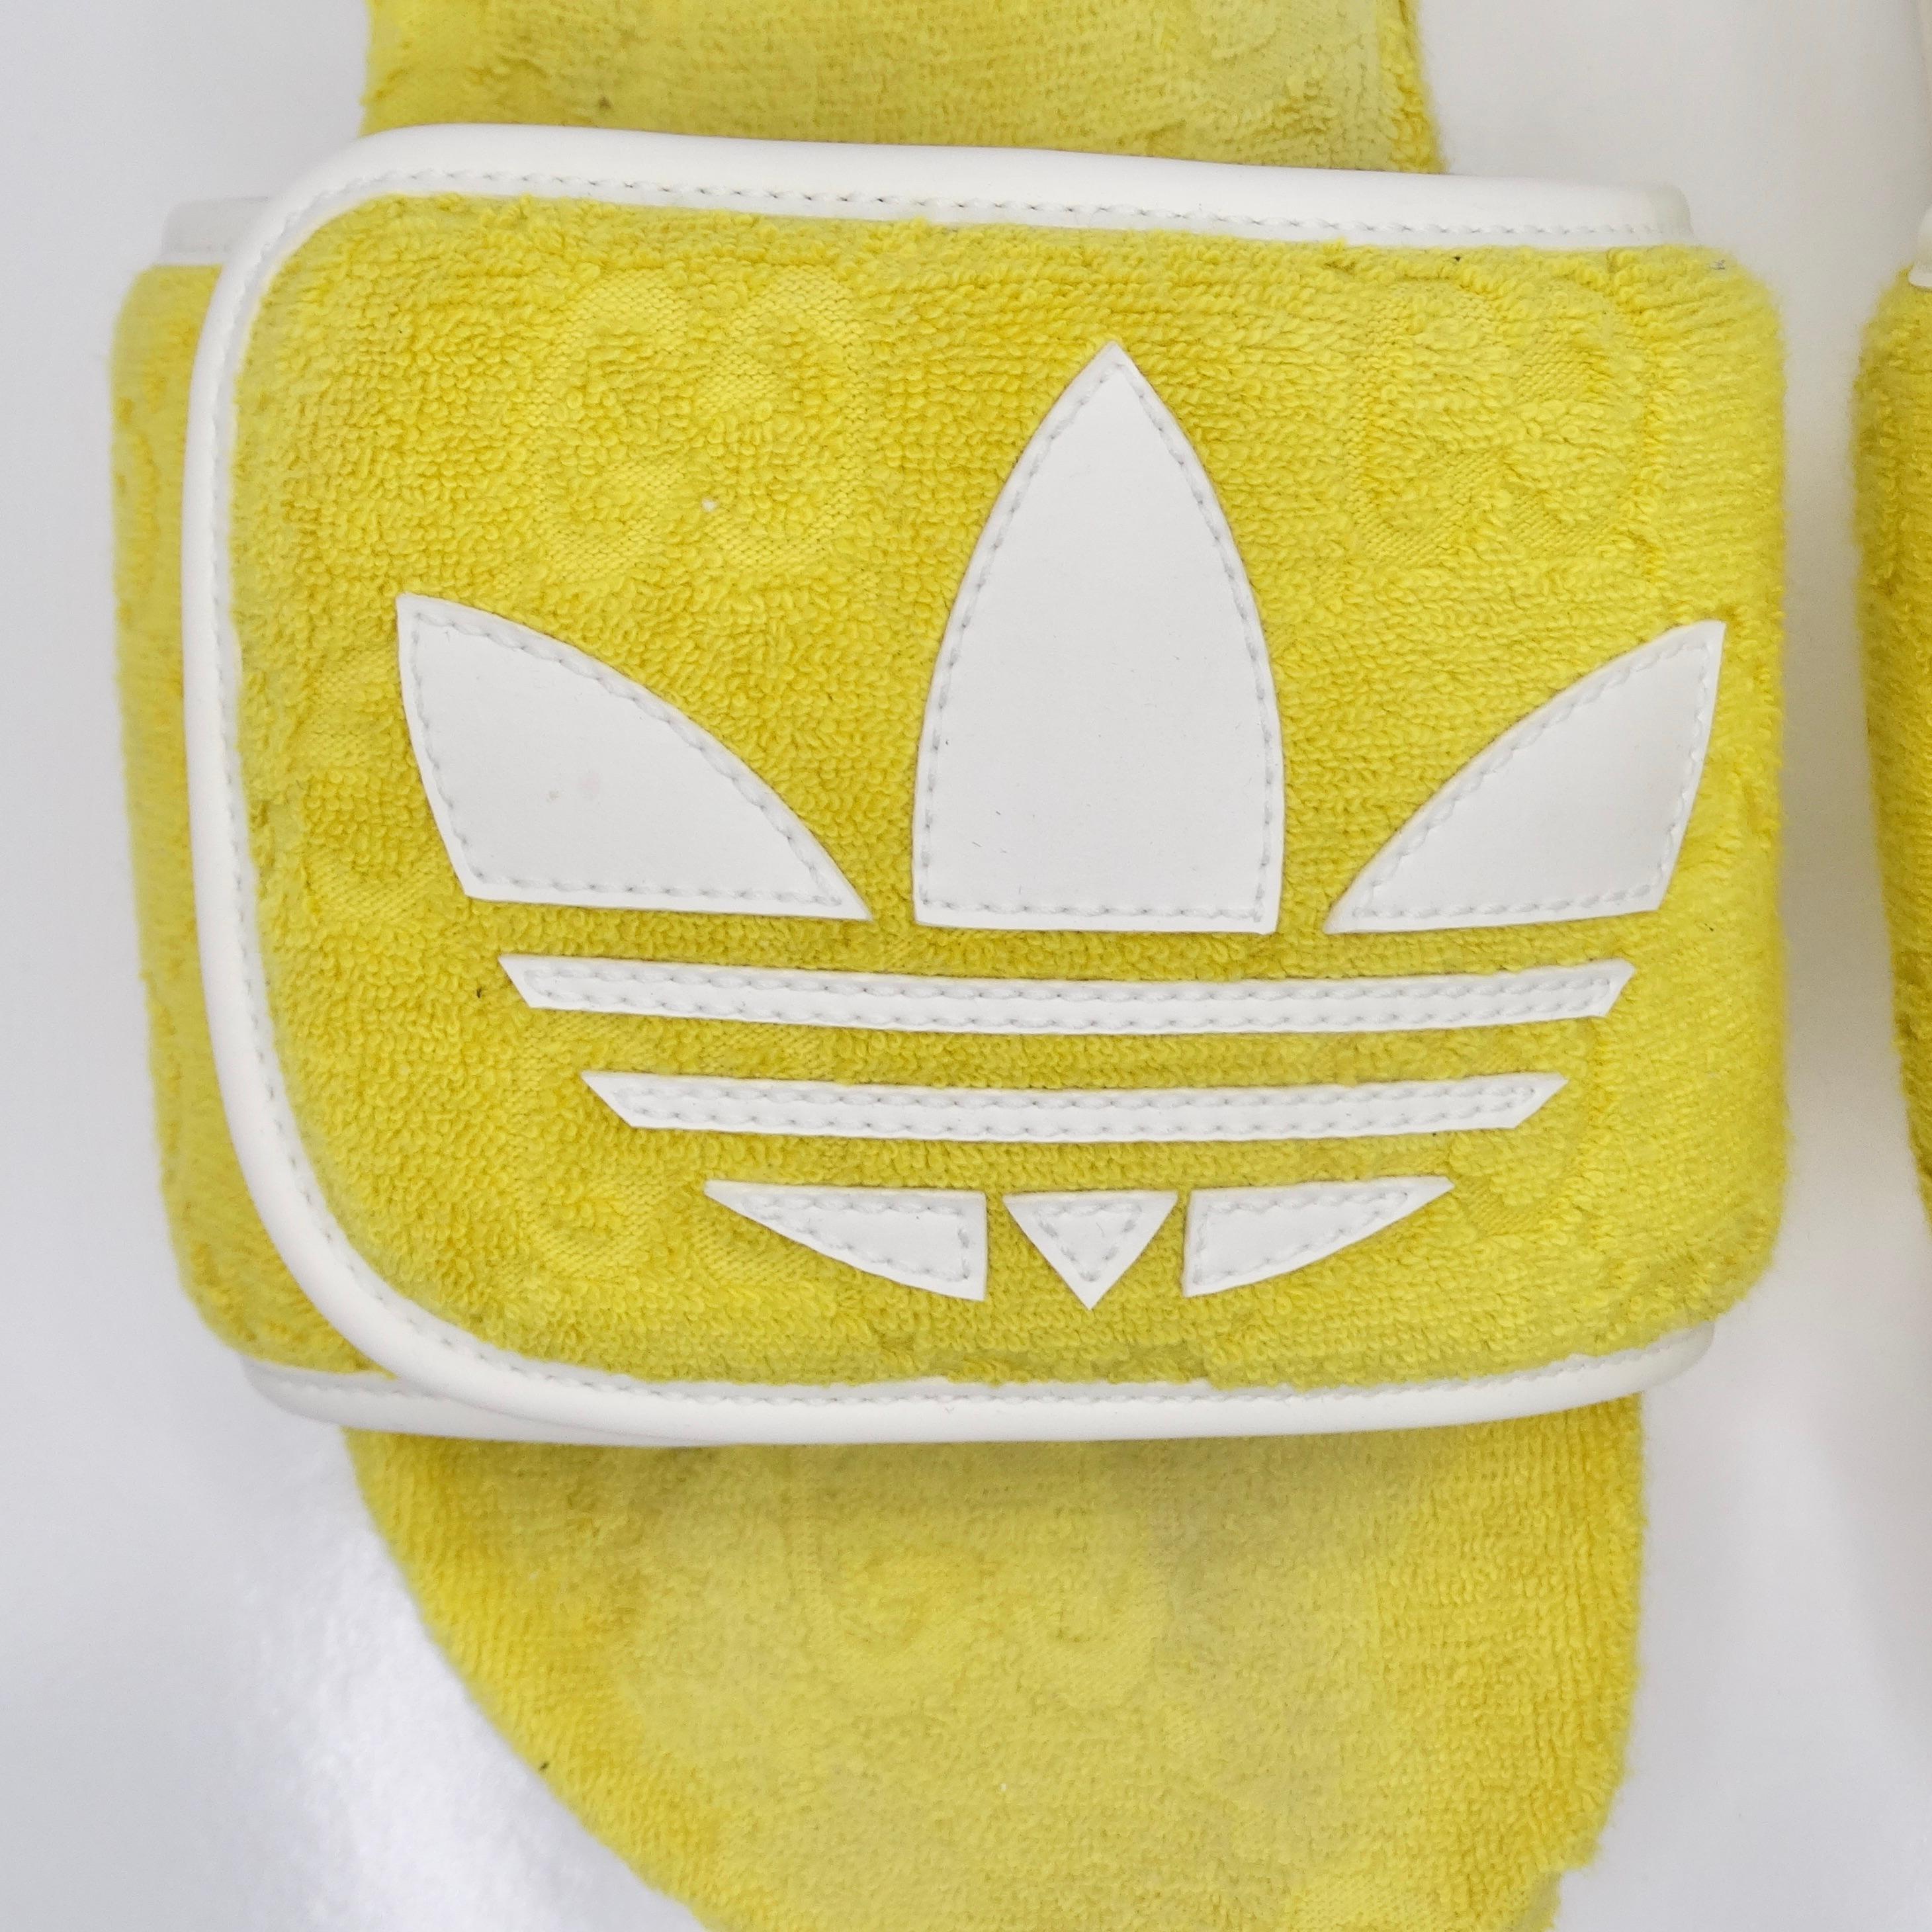 Introducing the Gucci X Adidas Yellow Terry Cloth GG Monogram Platform Sandals – a vibrant and stylish collaboration that combines the iconic Gucci GG monogram with the sporty aesthetic of Adidas. Crafted from soft terry cloth in a bold yellow hue,